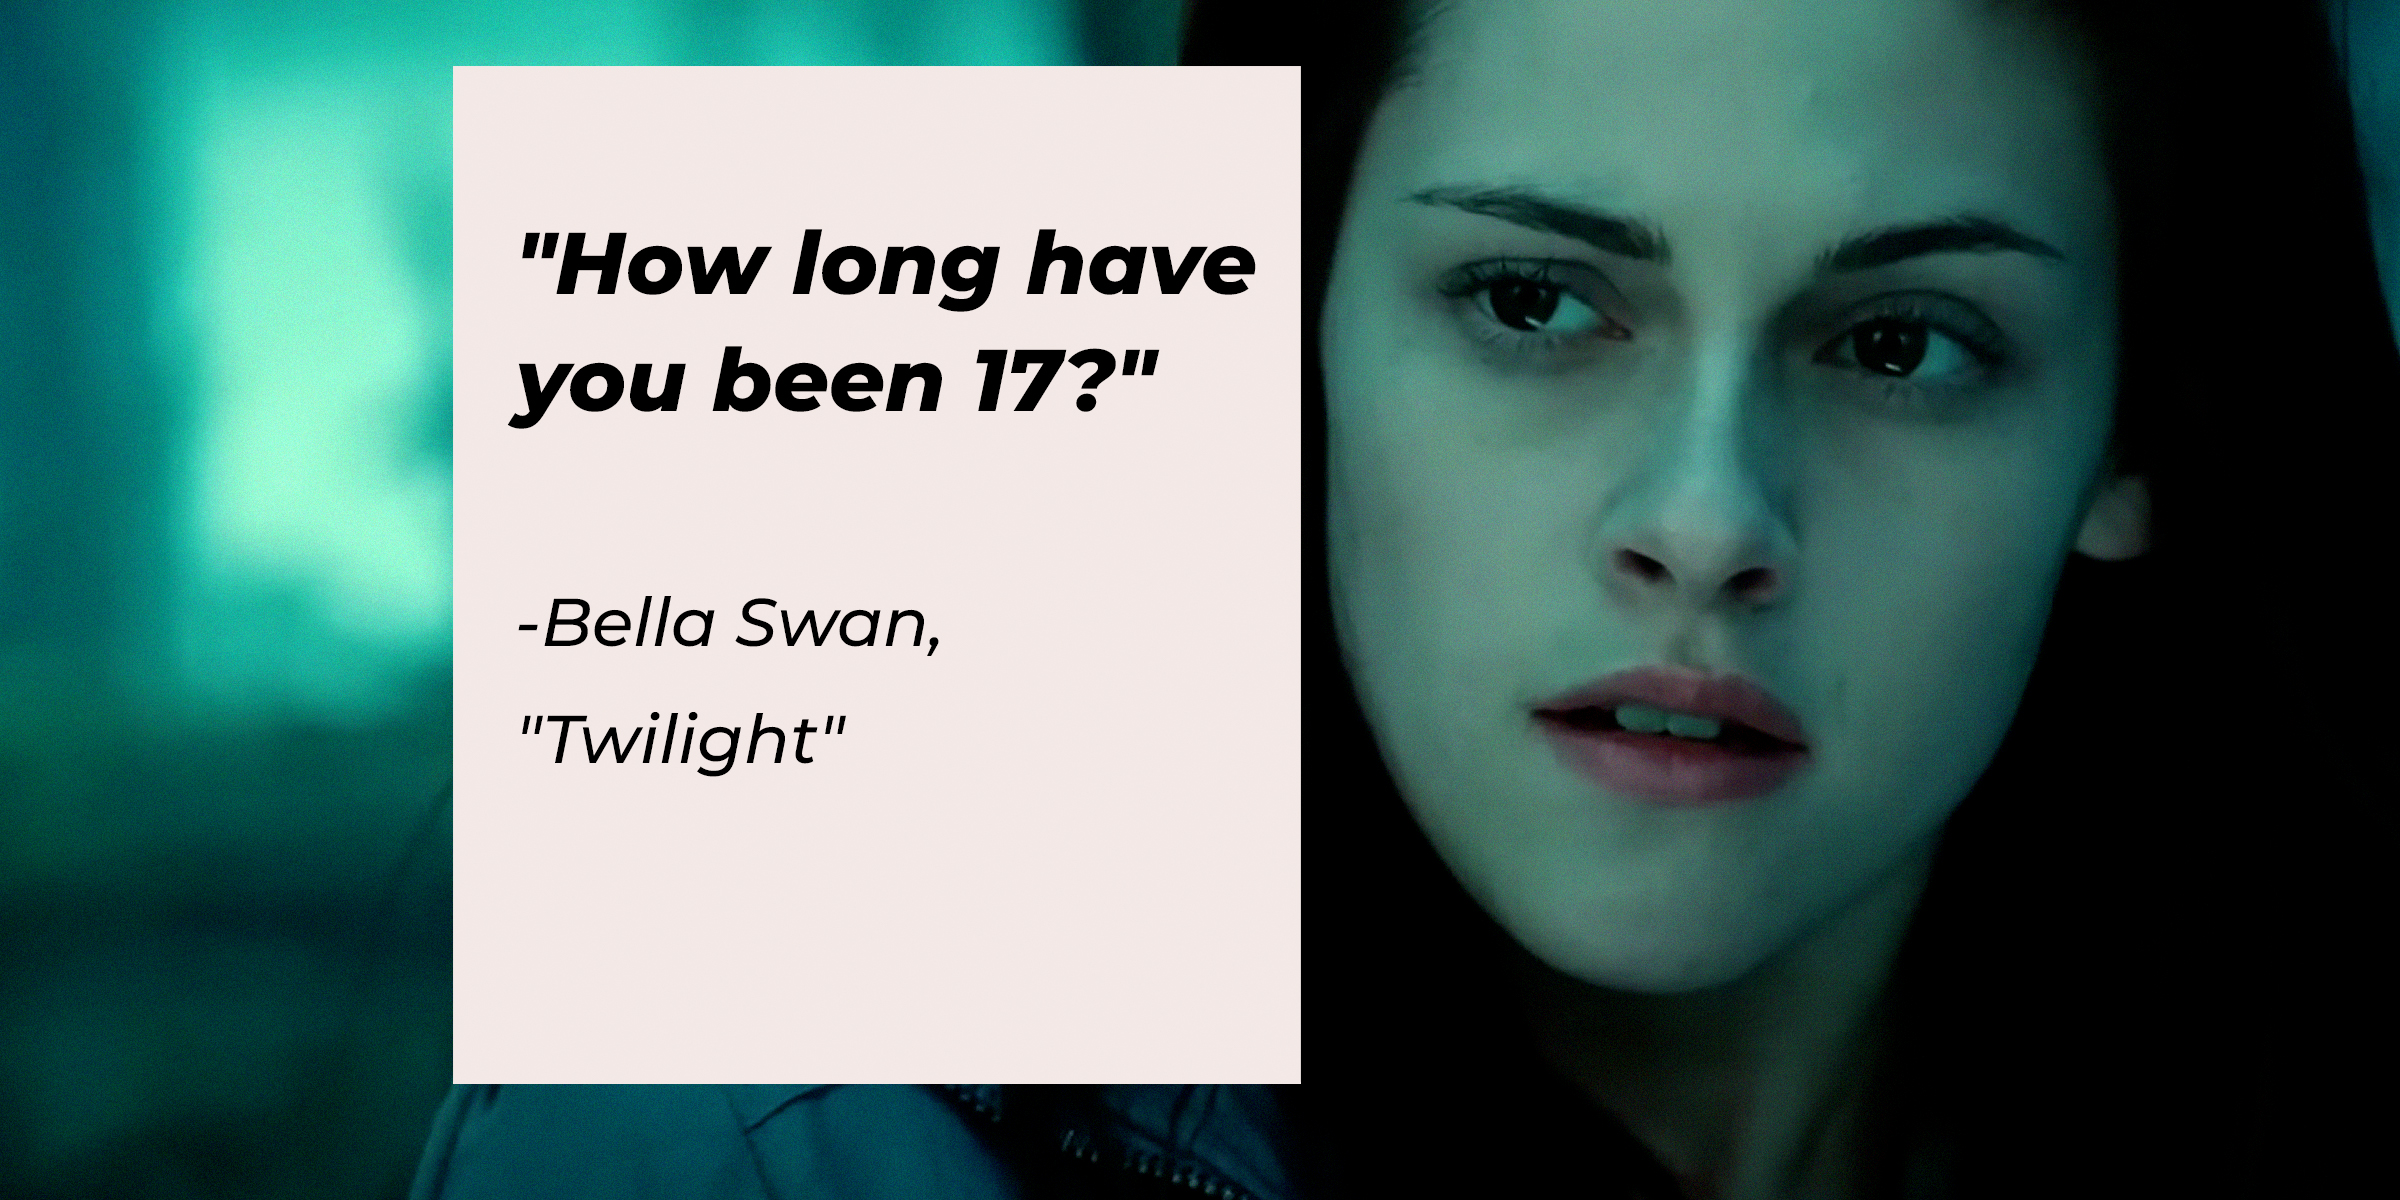 Bella Swan with her quote: “How long have you been 17?" | Source: Facebook.com/twilight